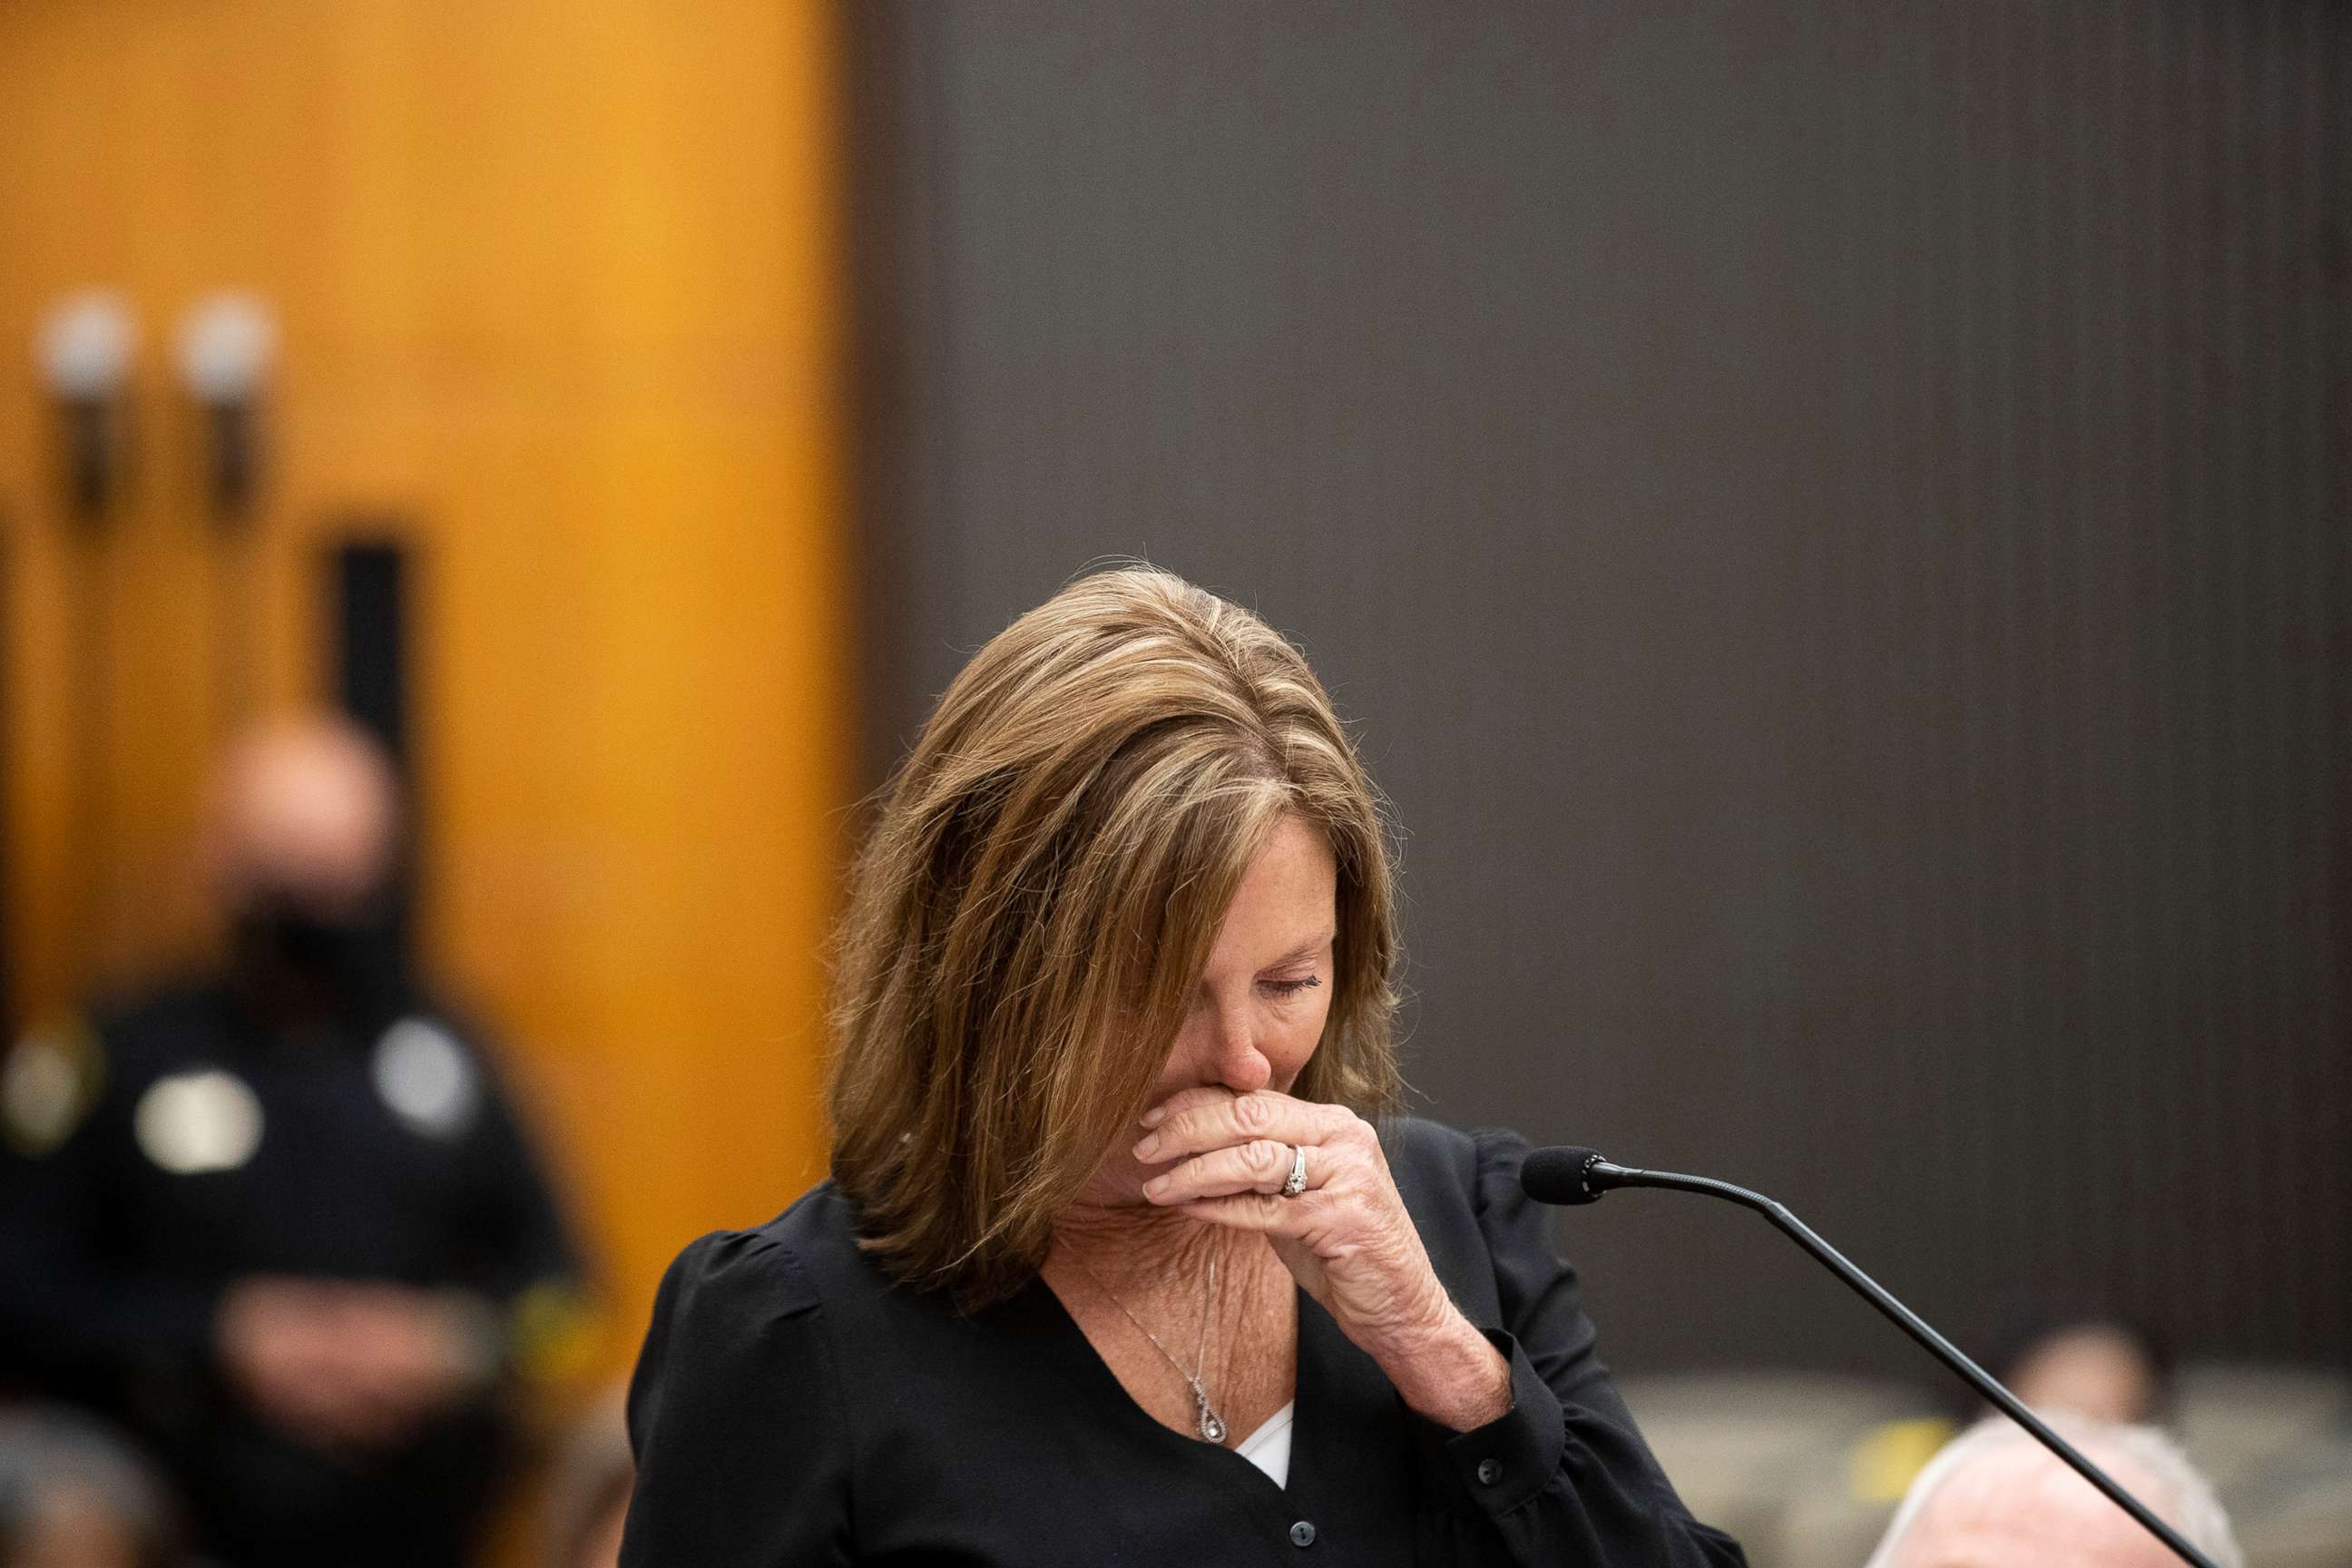 PHOTO: Kris Pedretti reads her victim impact statement as Joseph James DeAngelo is in the court room the Sacramento County Courthouse, in Sacramento, Calif., Aug. 18, 2020.